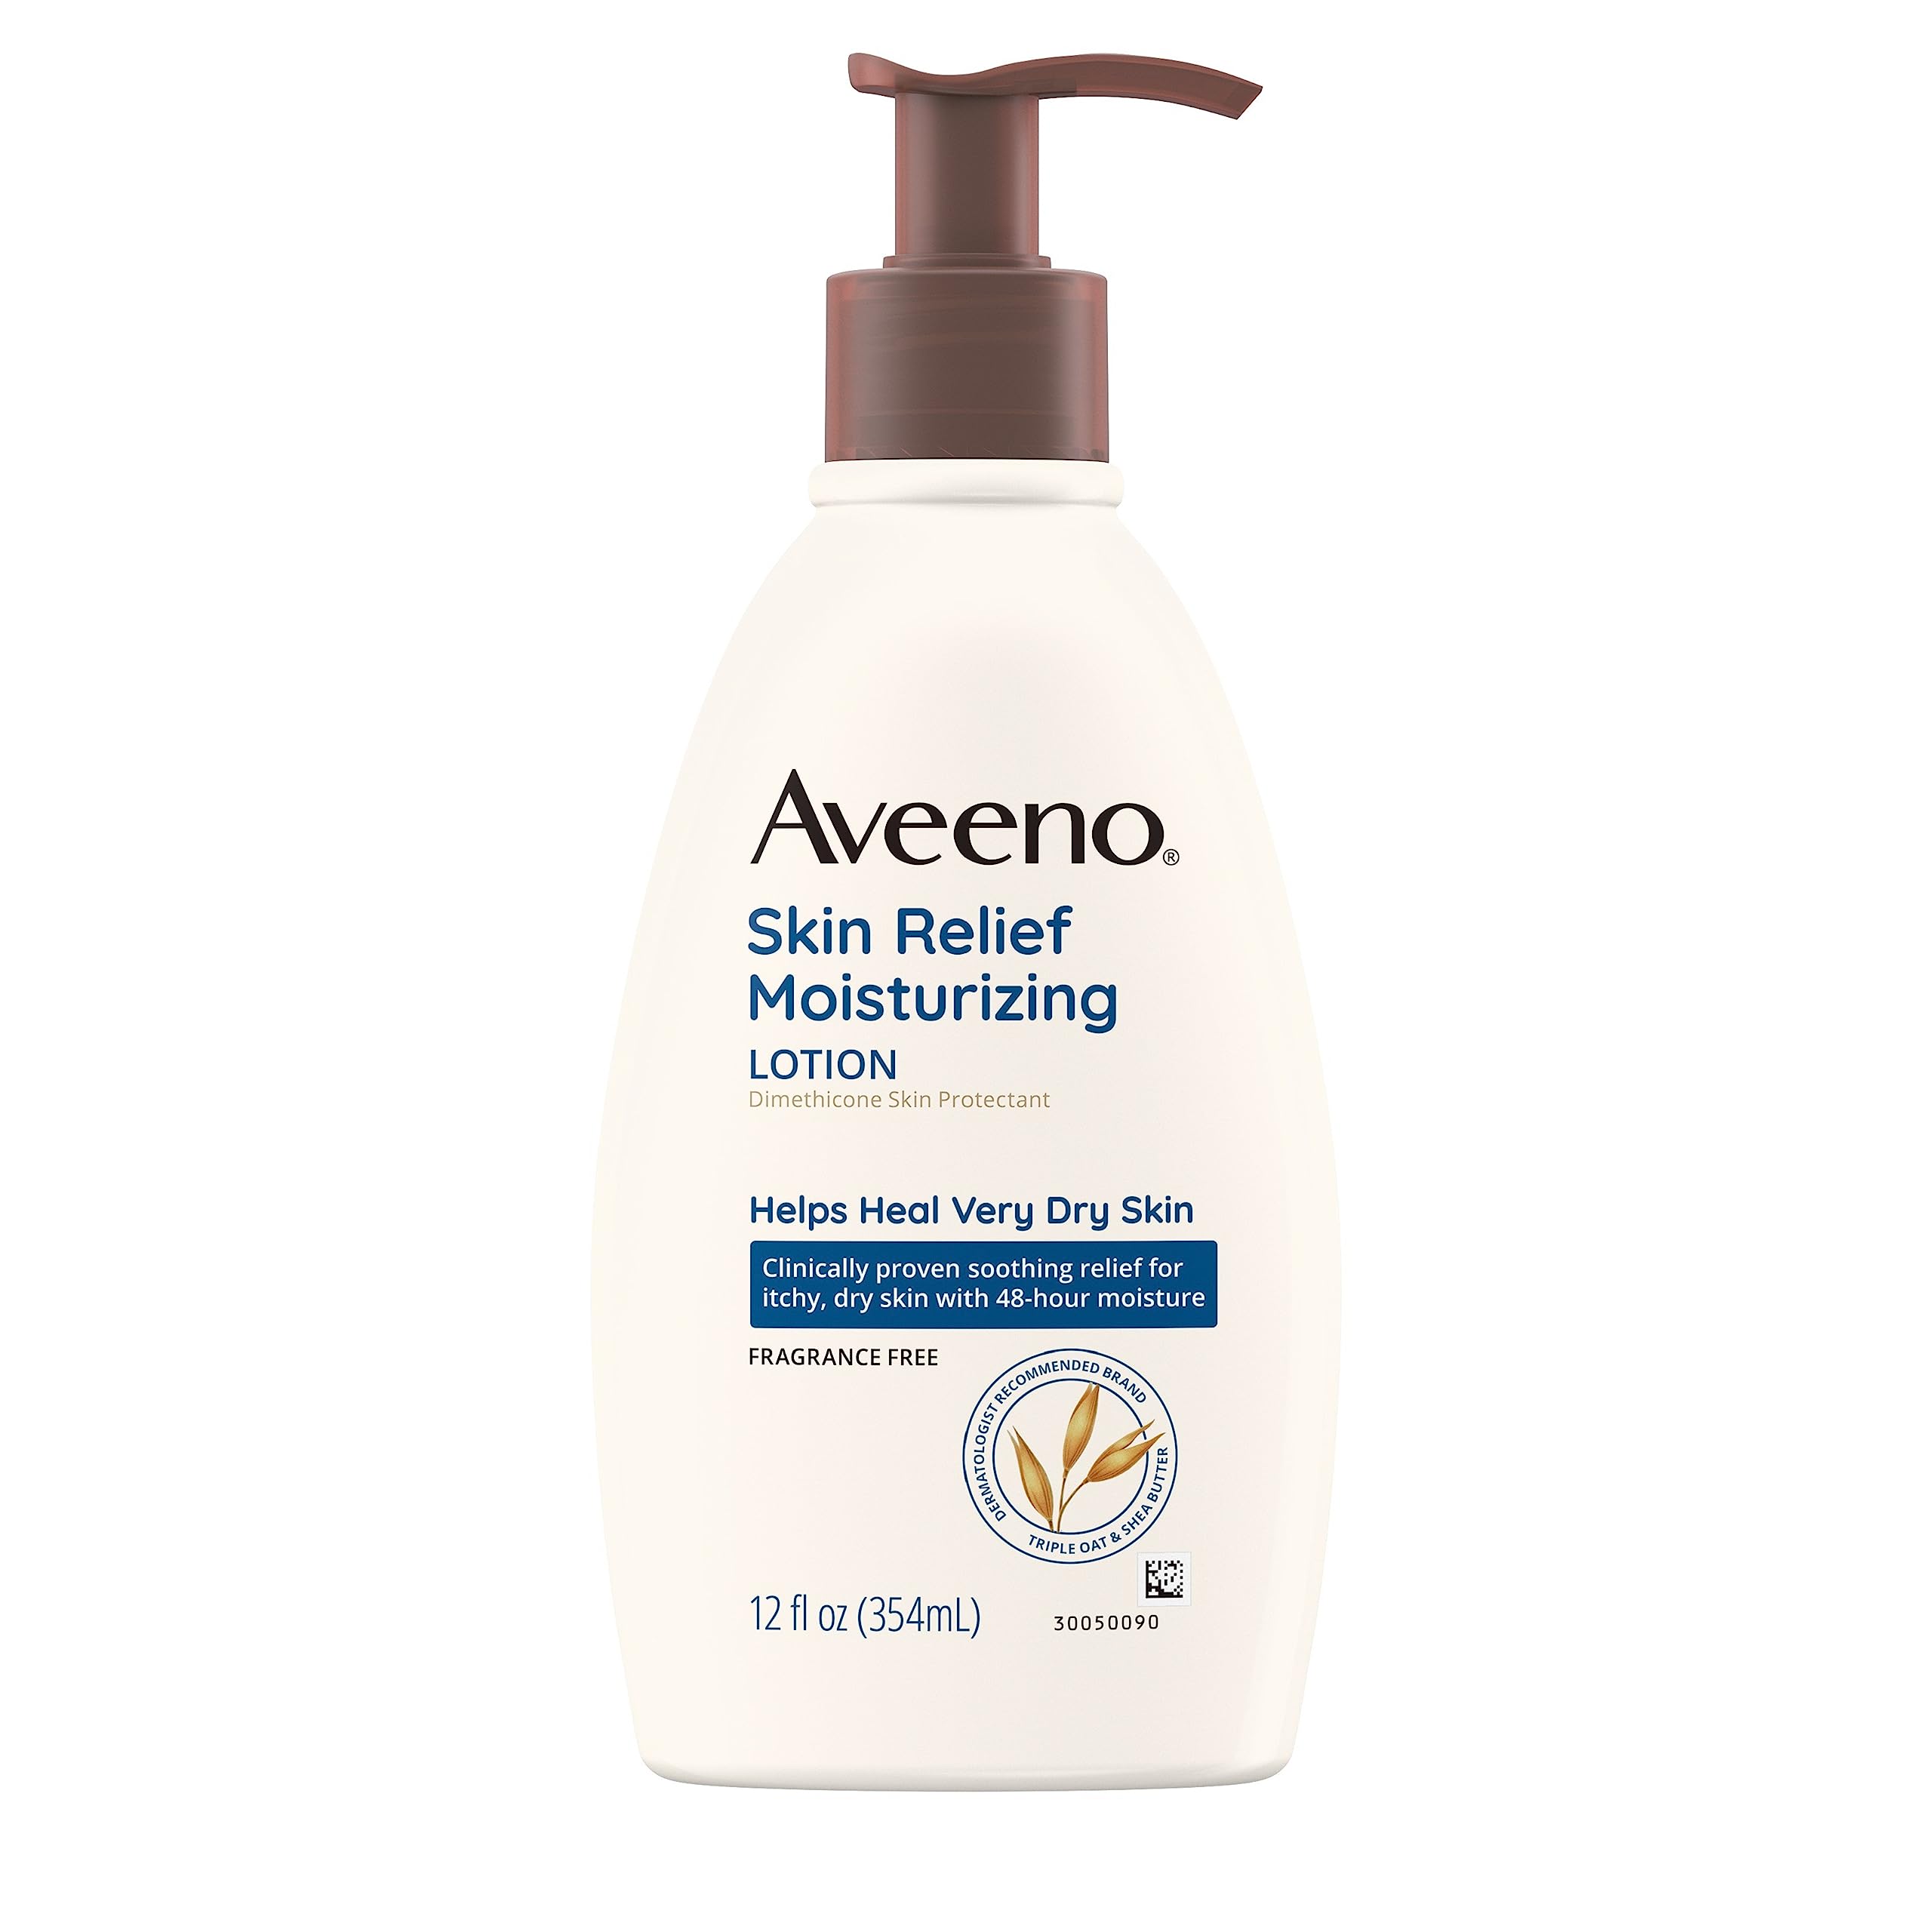 Aveeno Skin Relief 24-Hour Moisturizing Lotion for Sensitive Skin with Natural Shea Butter & Triple Oat Complex, Unscented Therapeutic Lotion for Extra Dry, Itchy Skin, 12 fl. oz